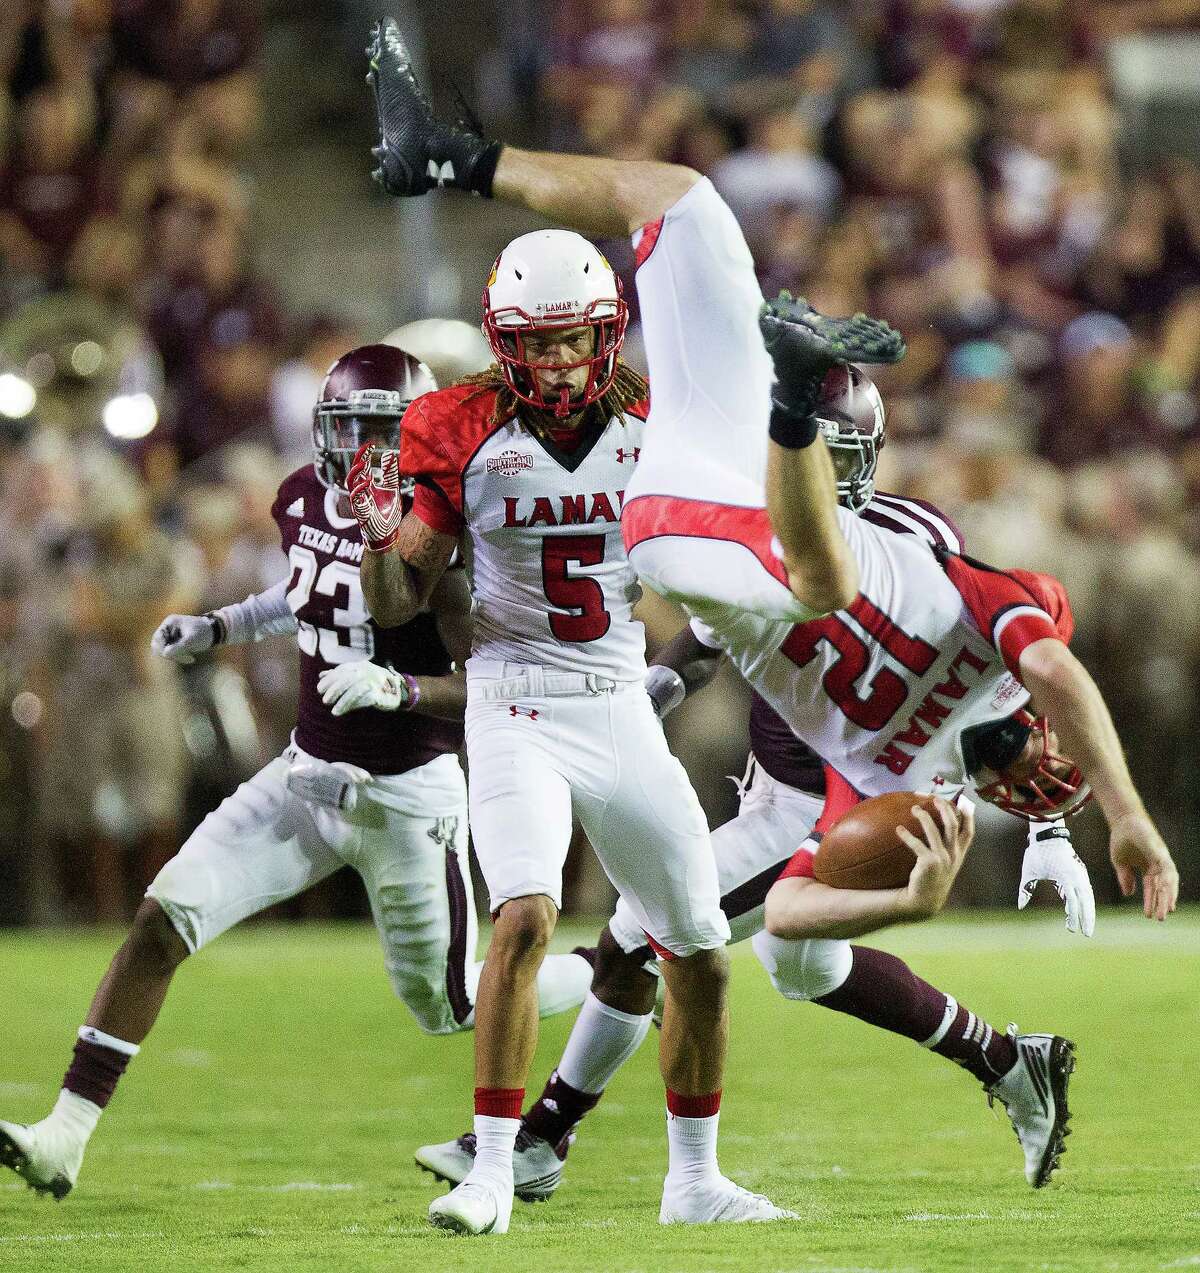 As expected, Lamar's Caleb Berry and his teammates suffered a hard landing Saturday night at A&M.